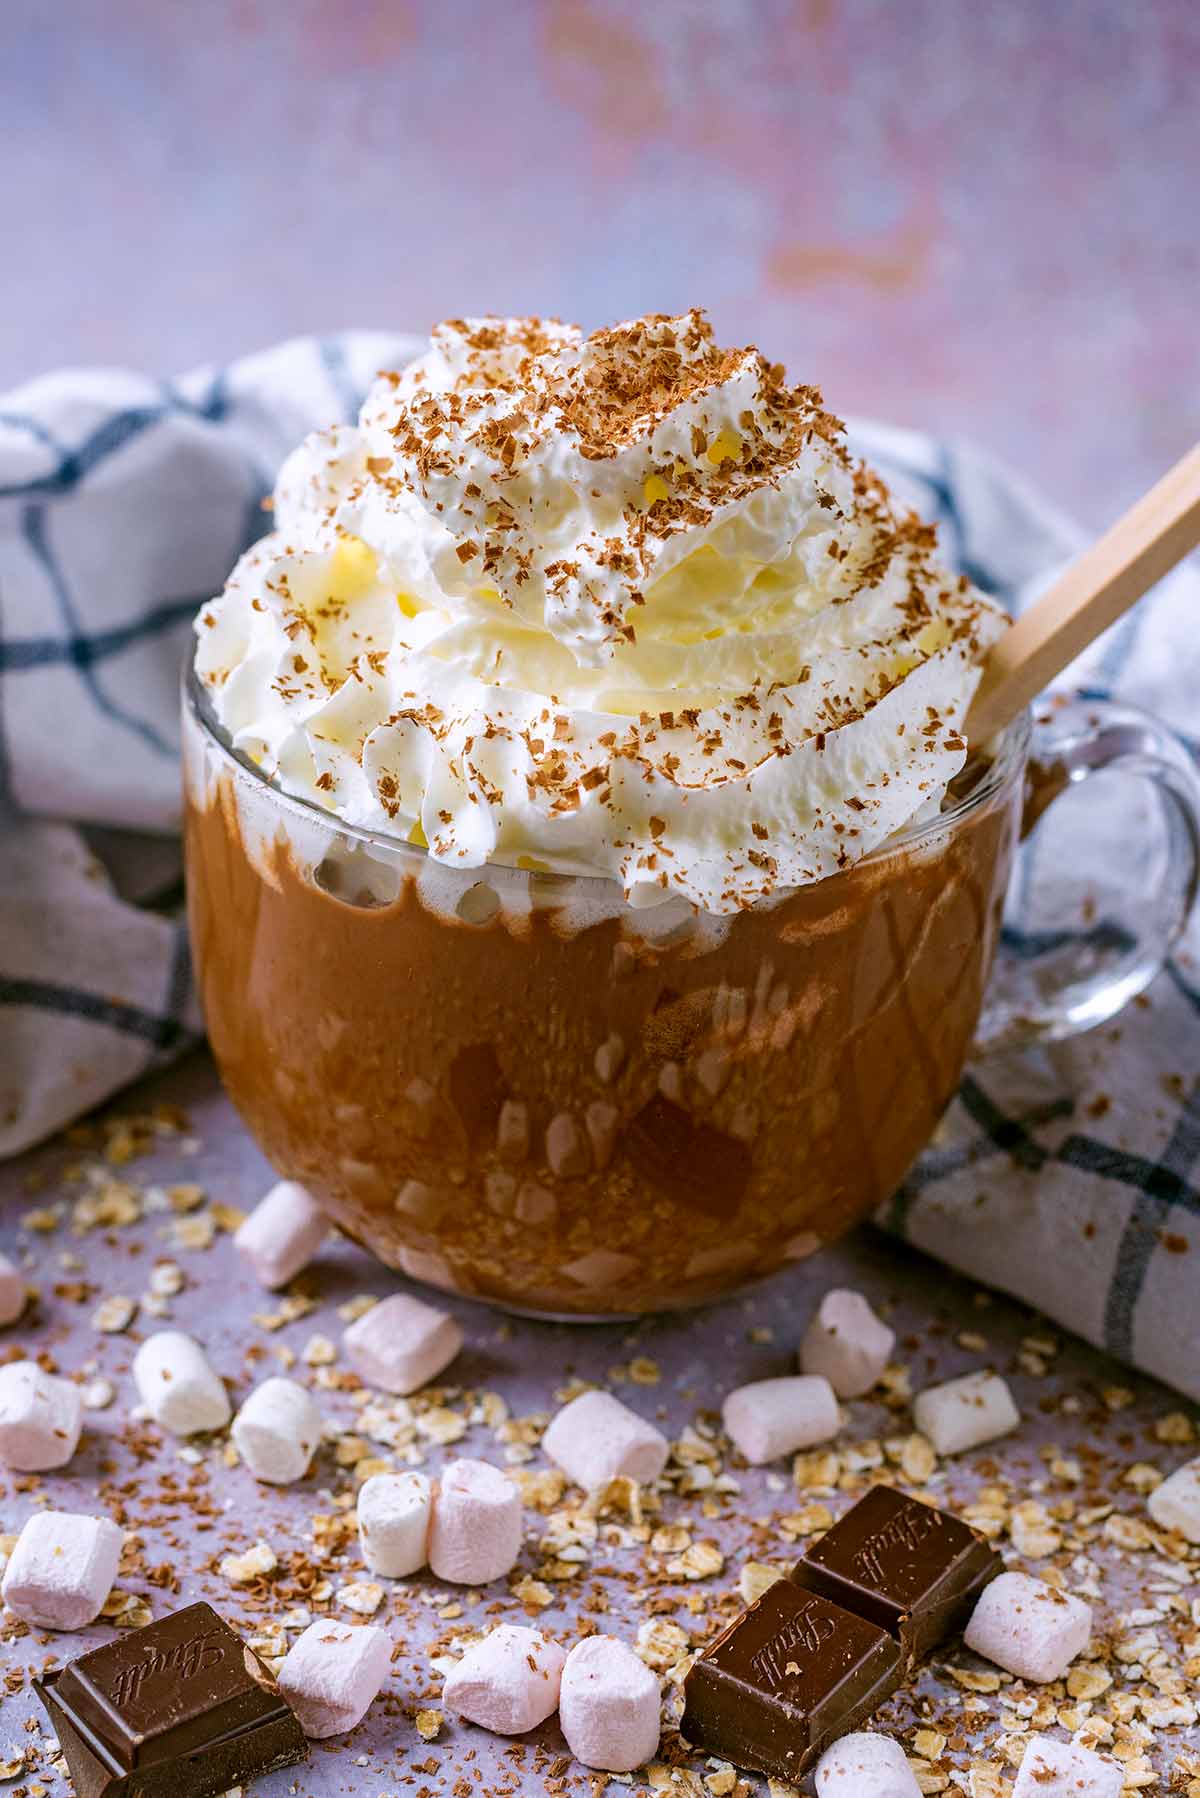 Hot chocolate in a glass mug topped with whipped cream.